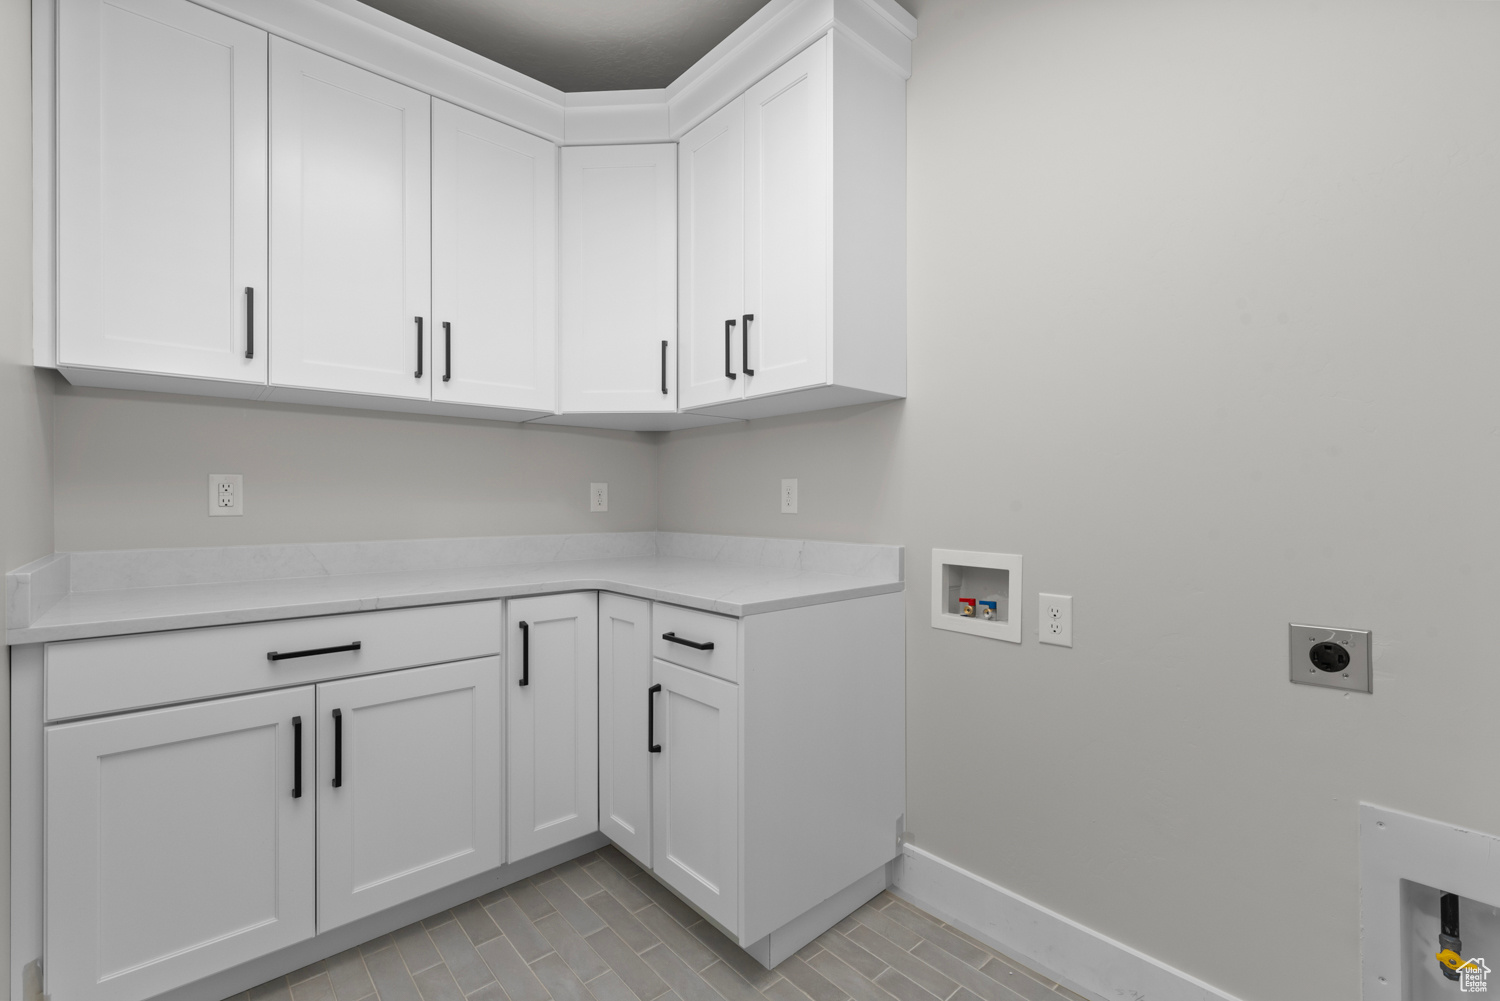 Laundry room featuring cabinets, hookup for an electric dryer, and hookup for a washing machine